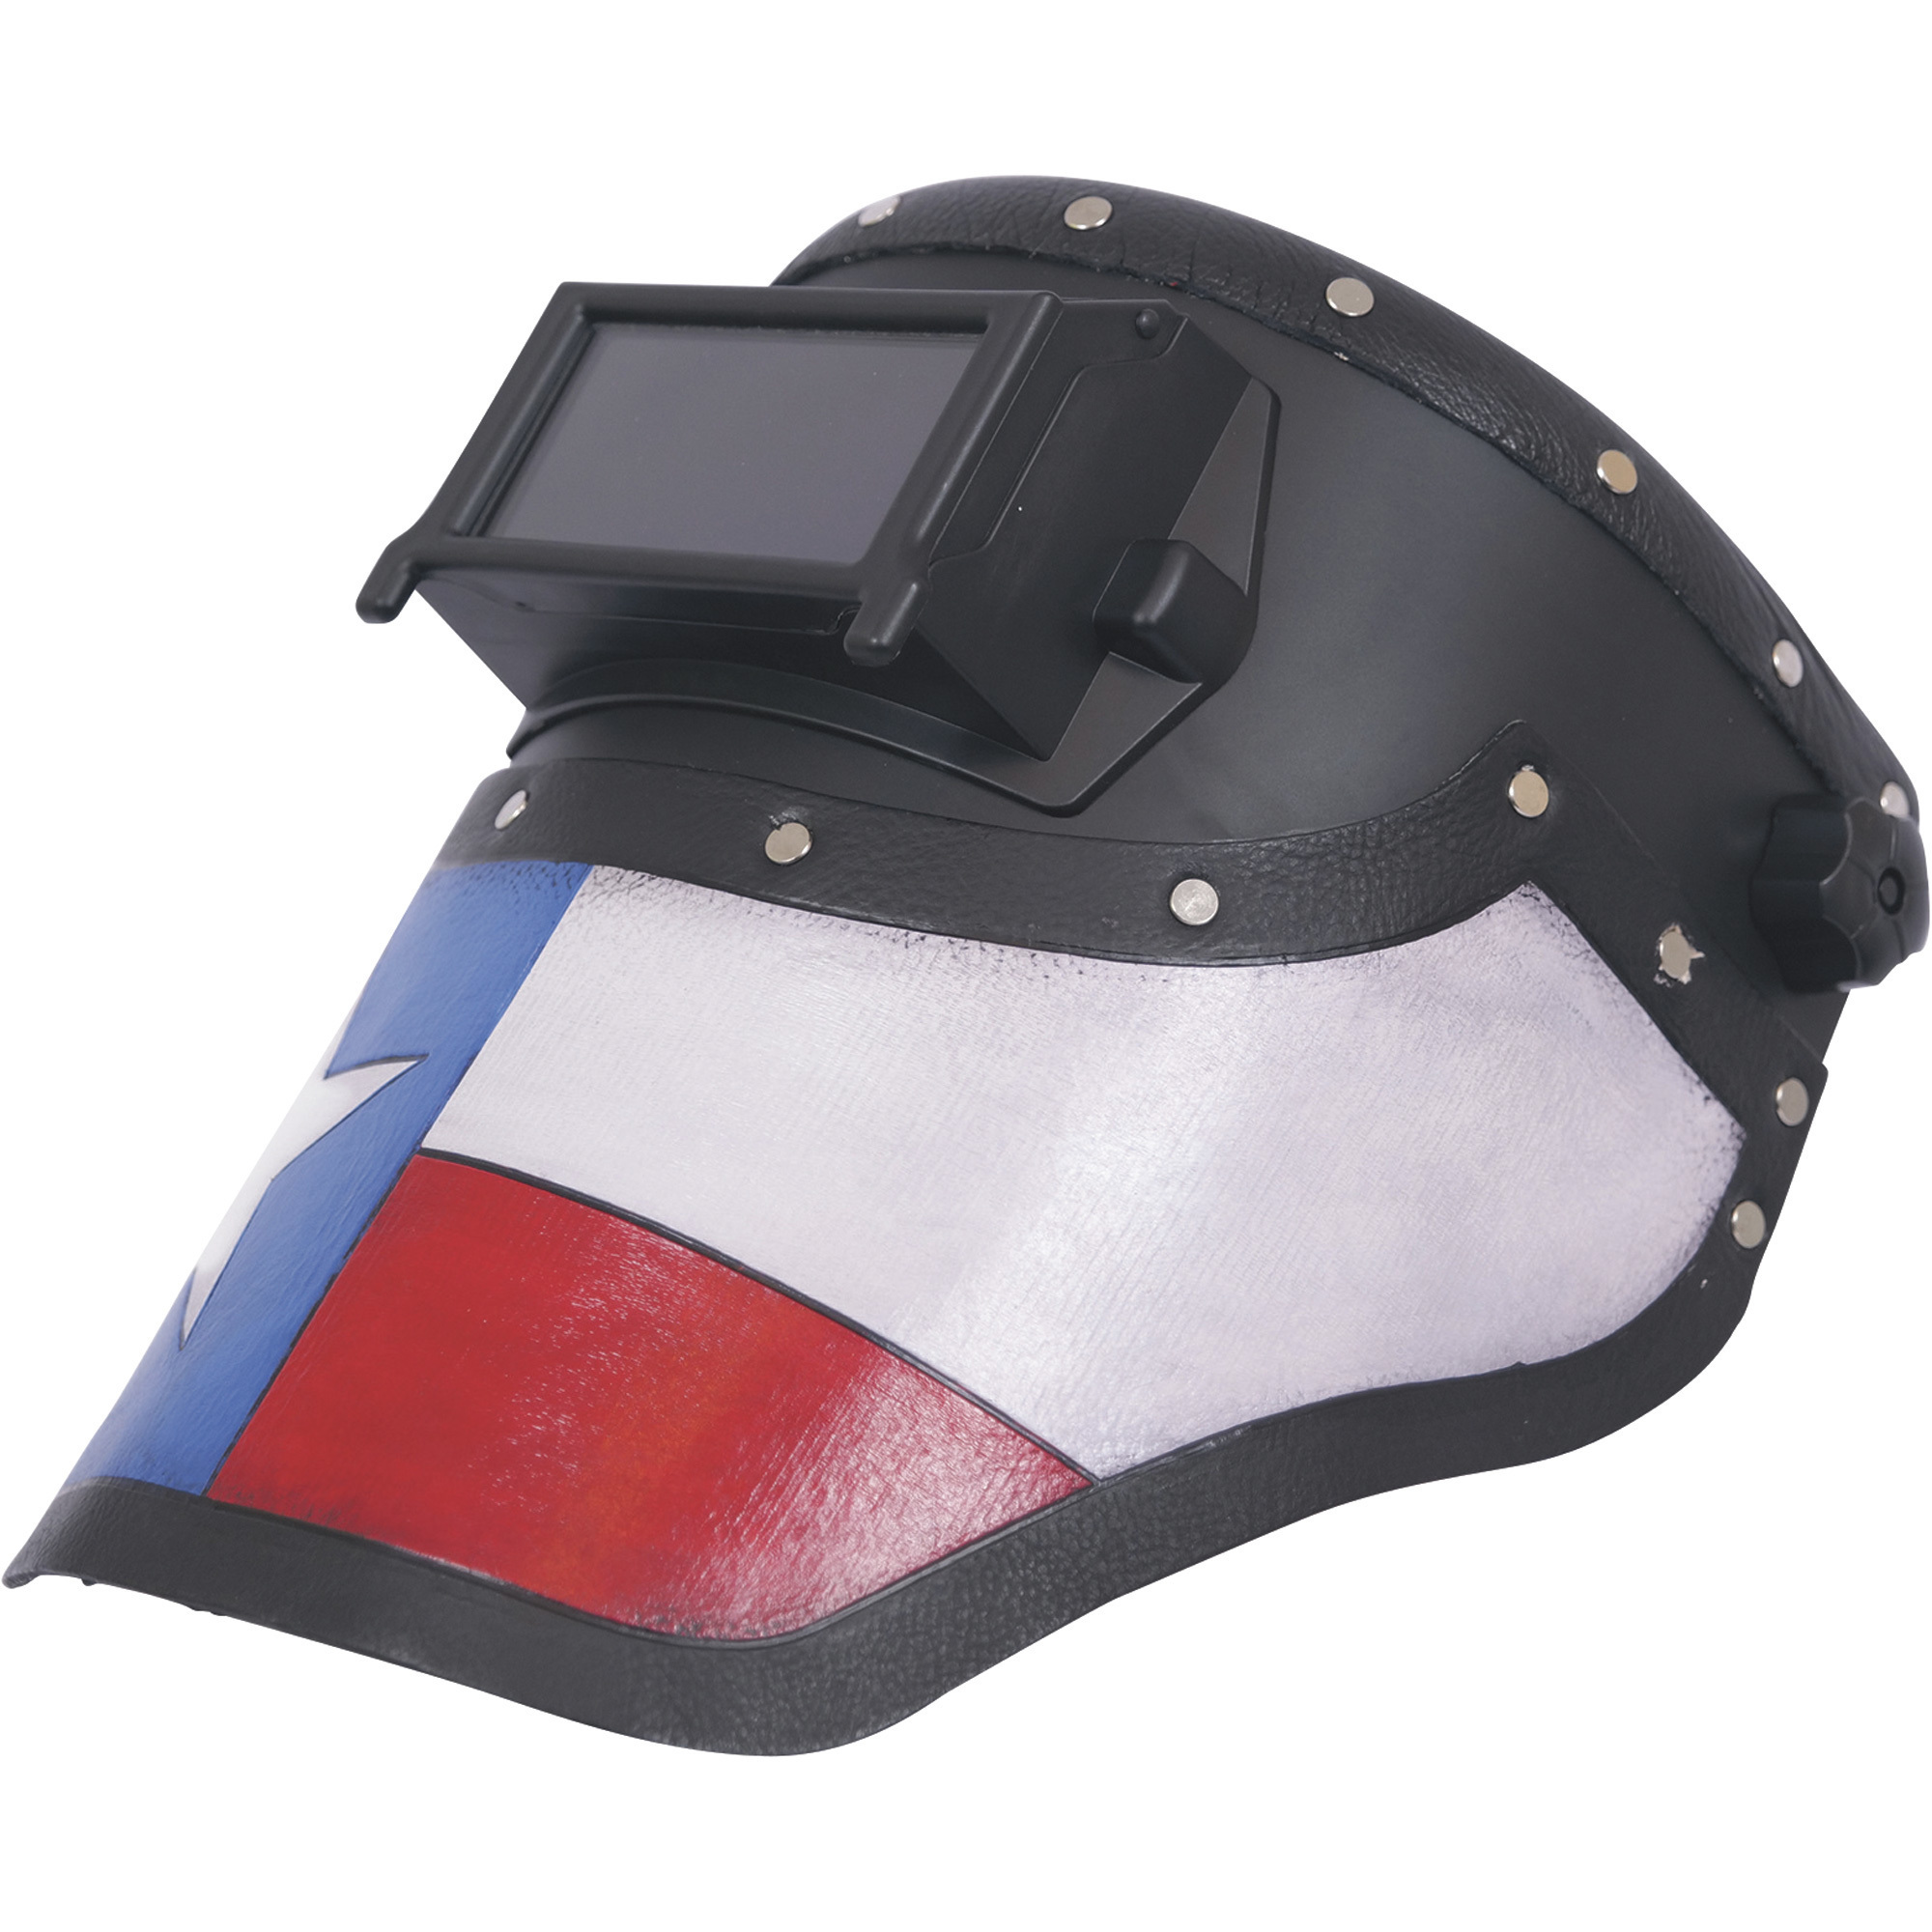 Outlaw Leather Welding Hood with Shade 10 â 2Inch x 4 1/4Inch Filter, Texas Original, Model OL-TXTR-101